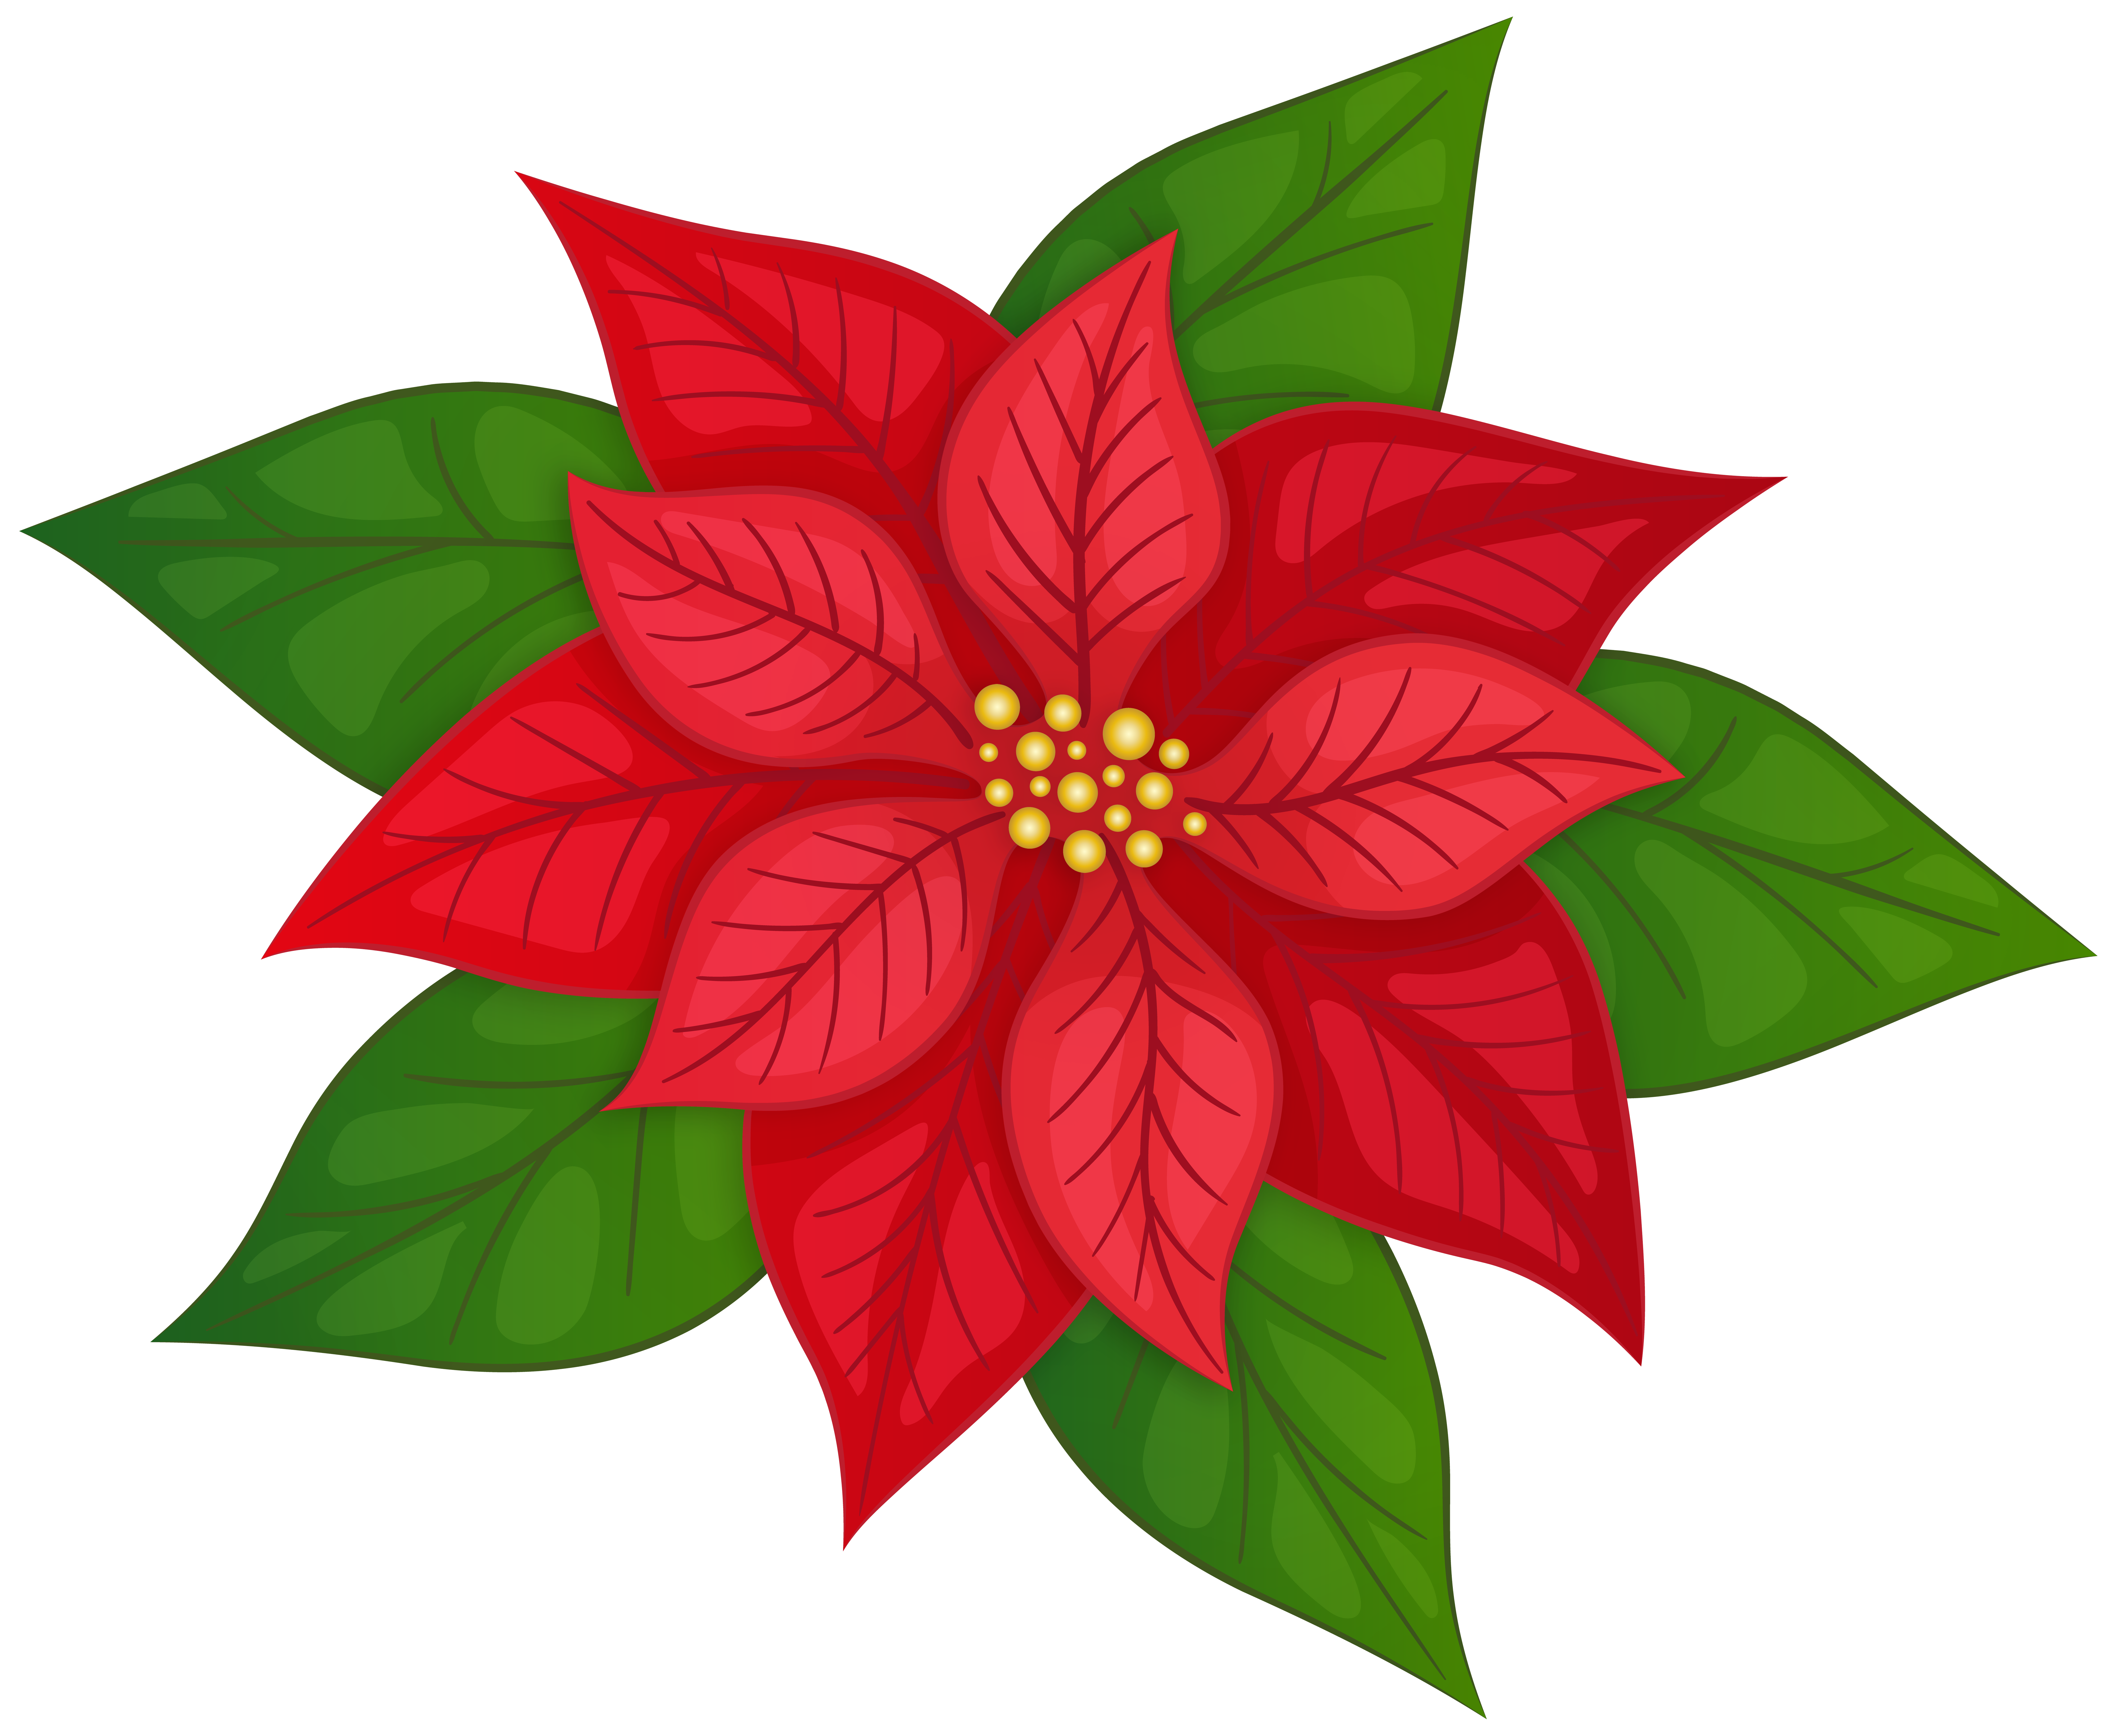 https://gallery.yopriceville.com/var/albums/Free-Clipart-Pictures/Christmas-PNG/Poinsettia_PNG_Transparent_Clipart.png?m=1636963603